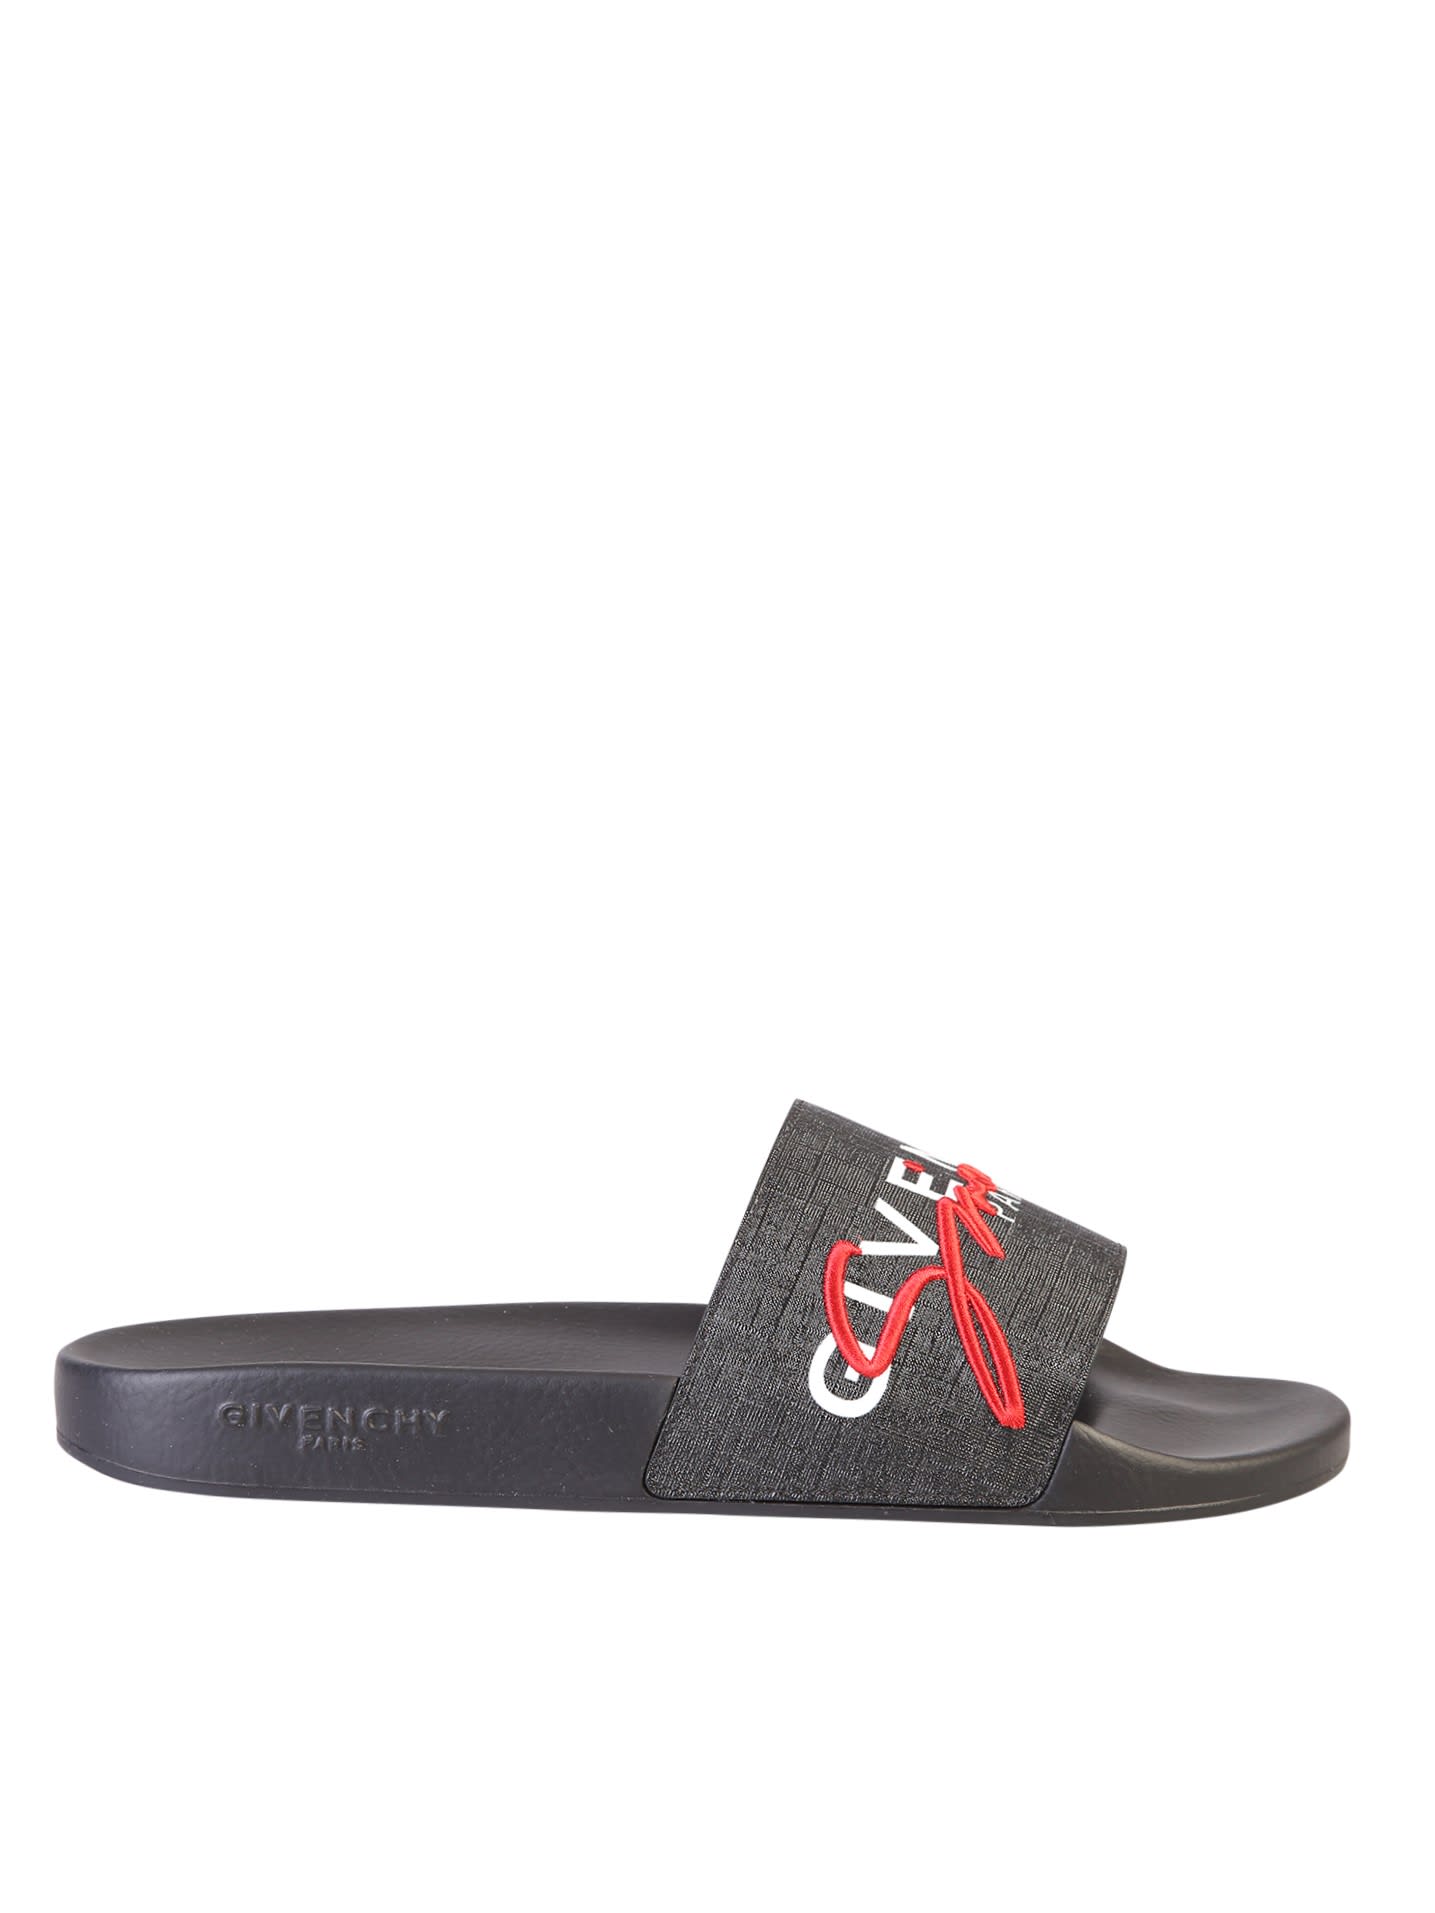 GIVENCHY BRANDED SANDALS,11201733